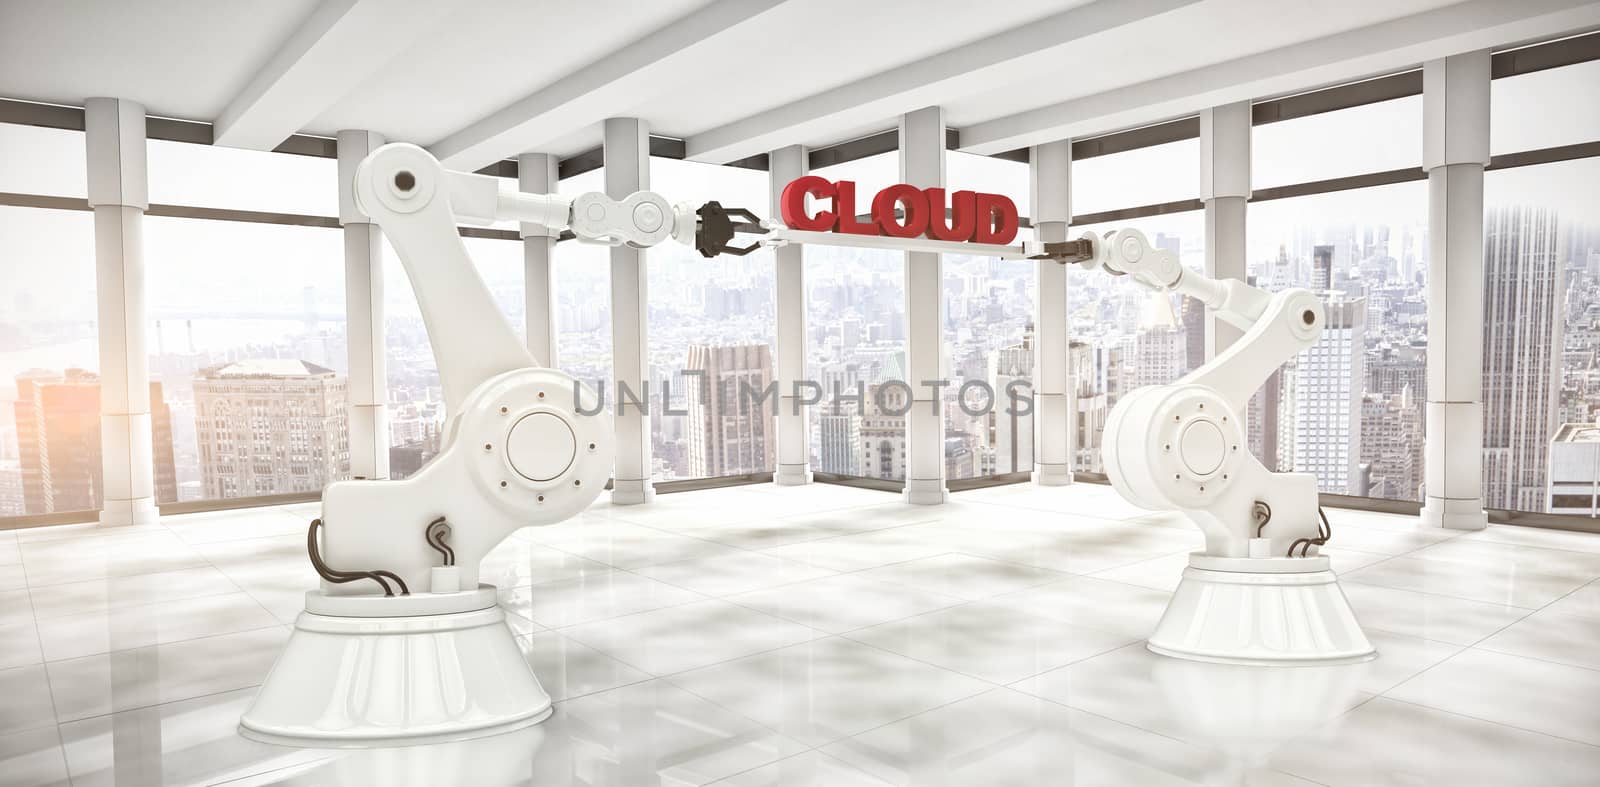 Composite image of robotic hands holding red cloud text over white background by Wavebreakmedia